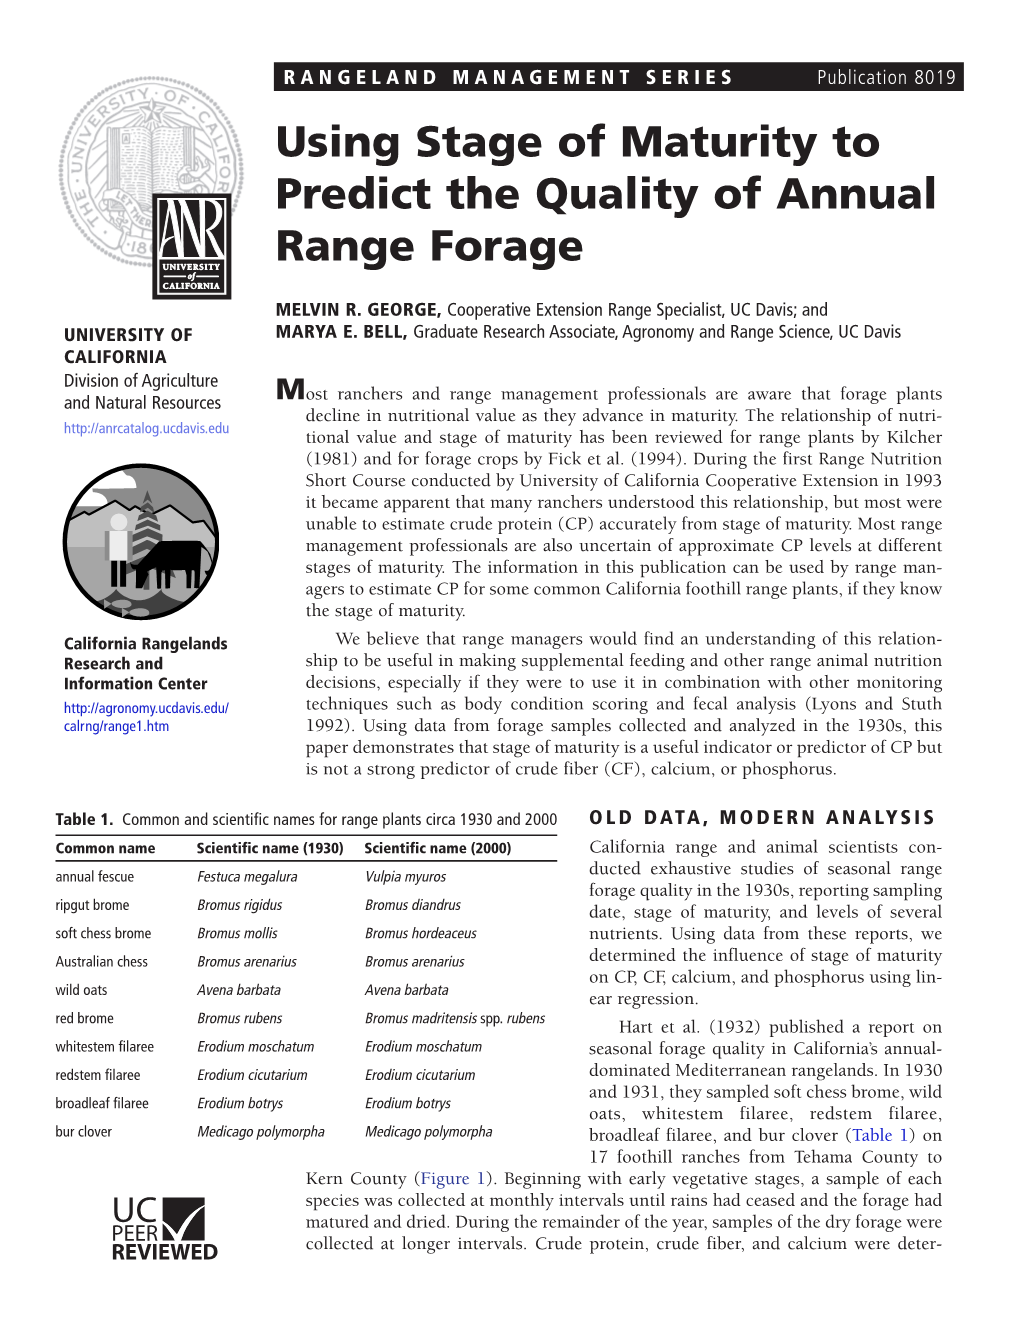 Using Stage of Maturity to Predict the Quality of Annual Range Forage